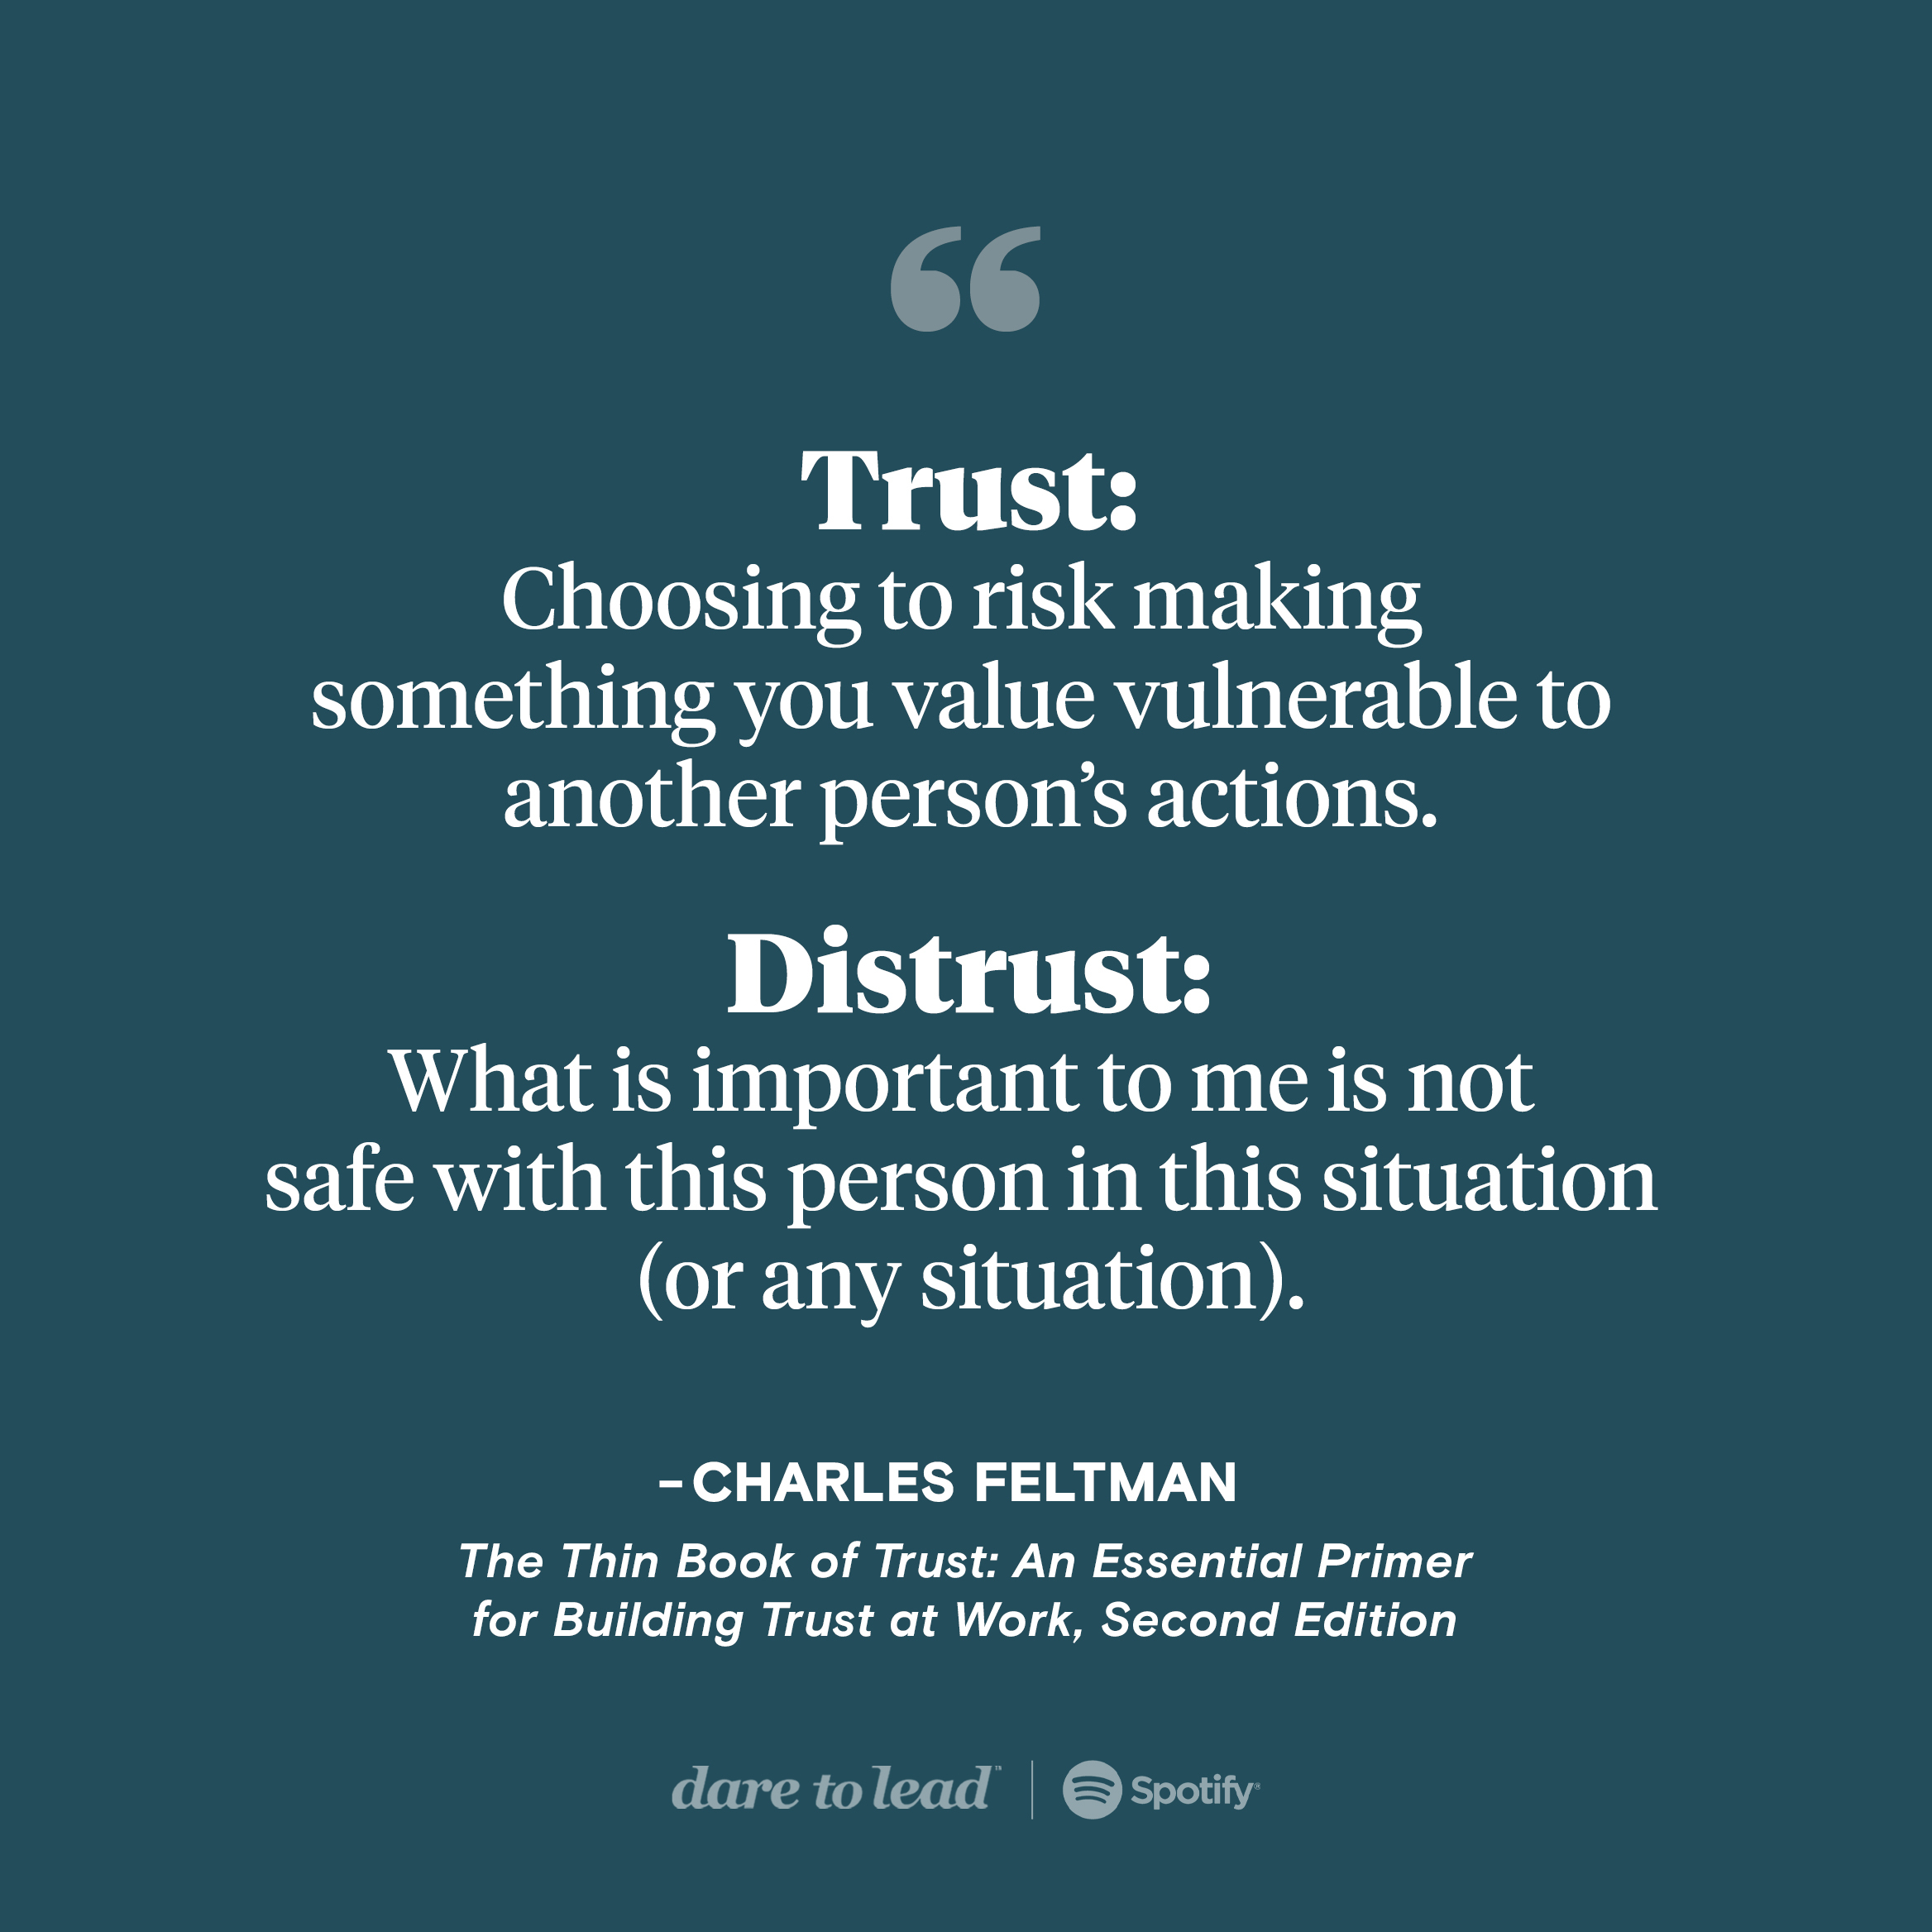 Charles Feltman’s definitions of trust and distrust